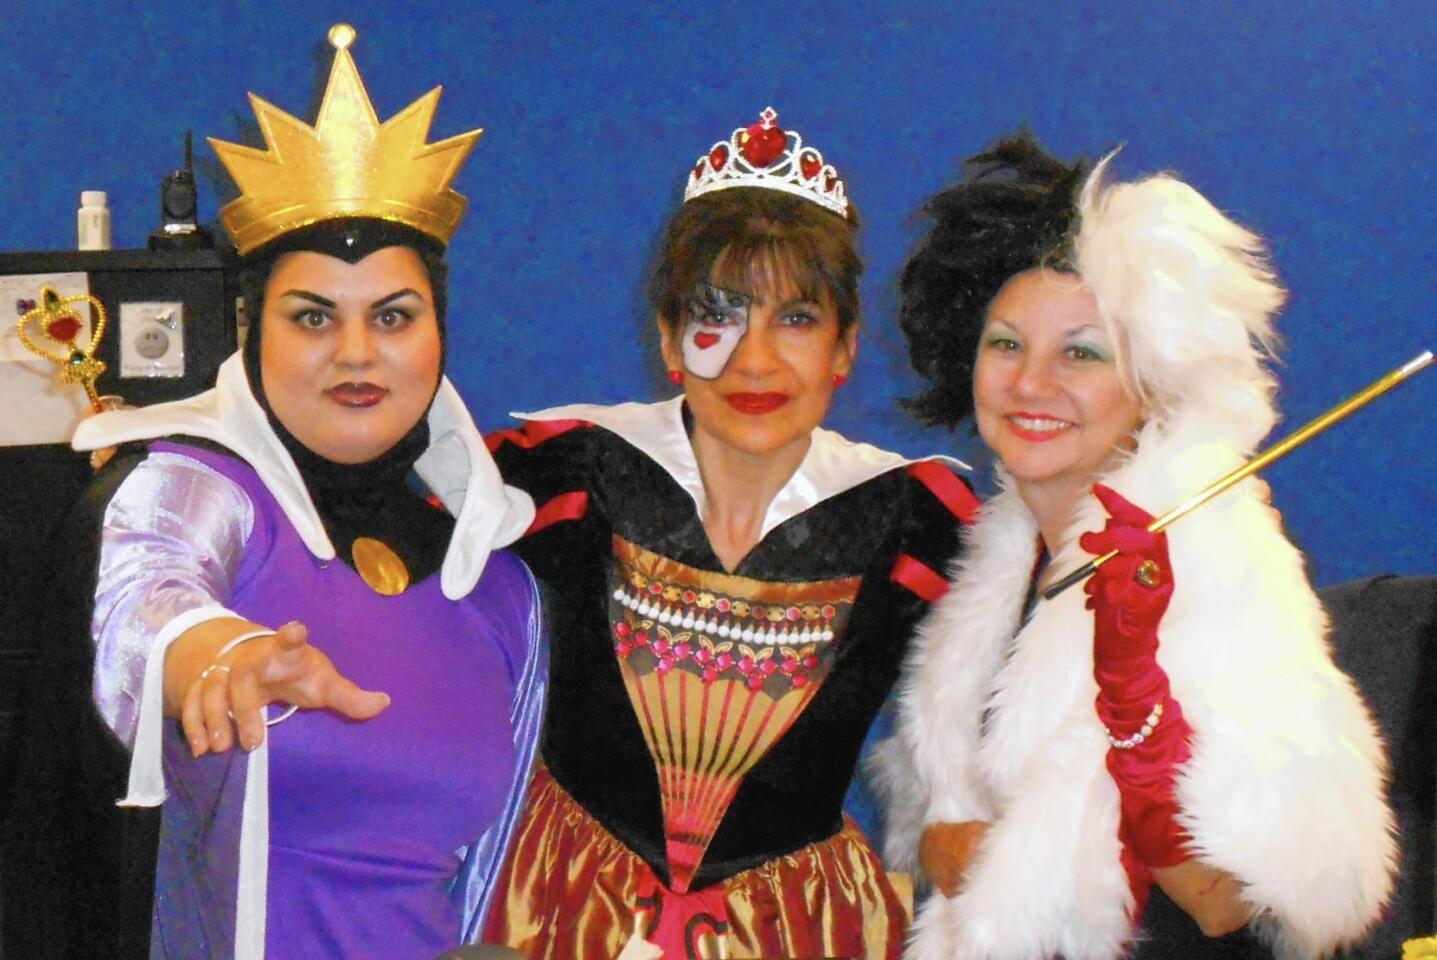 Connie Winkleman of Irvine says she wasn’t a big fan of dressing up for Halloween, especially at work, but then something happened. In 2012, she and some co-workers talked about dressing up and came up with "Disney Villains" as their theme. She is the Queen of Hearts in the center, with the Evil Queen and Cruella de Vil.